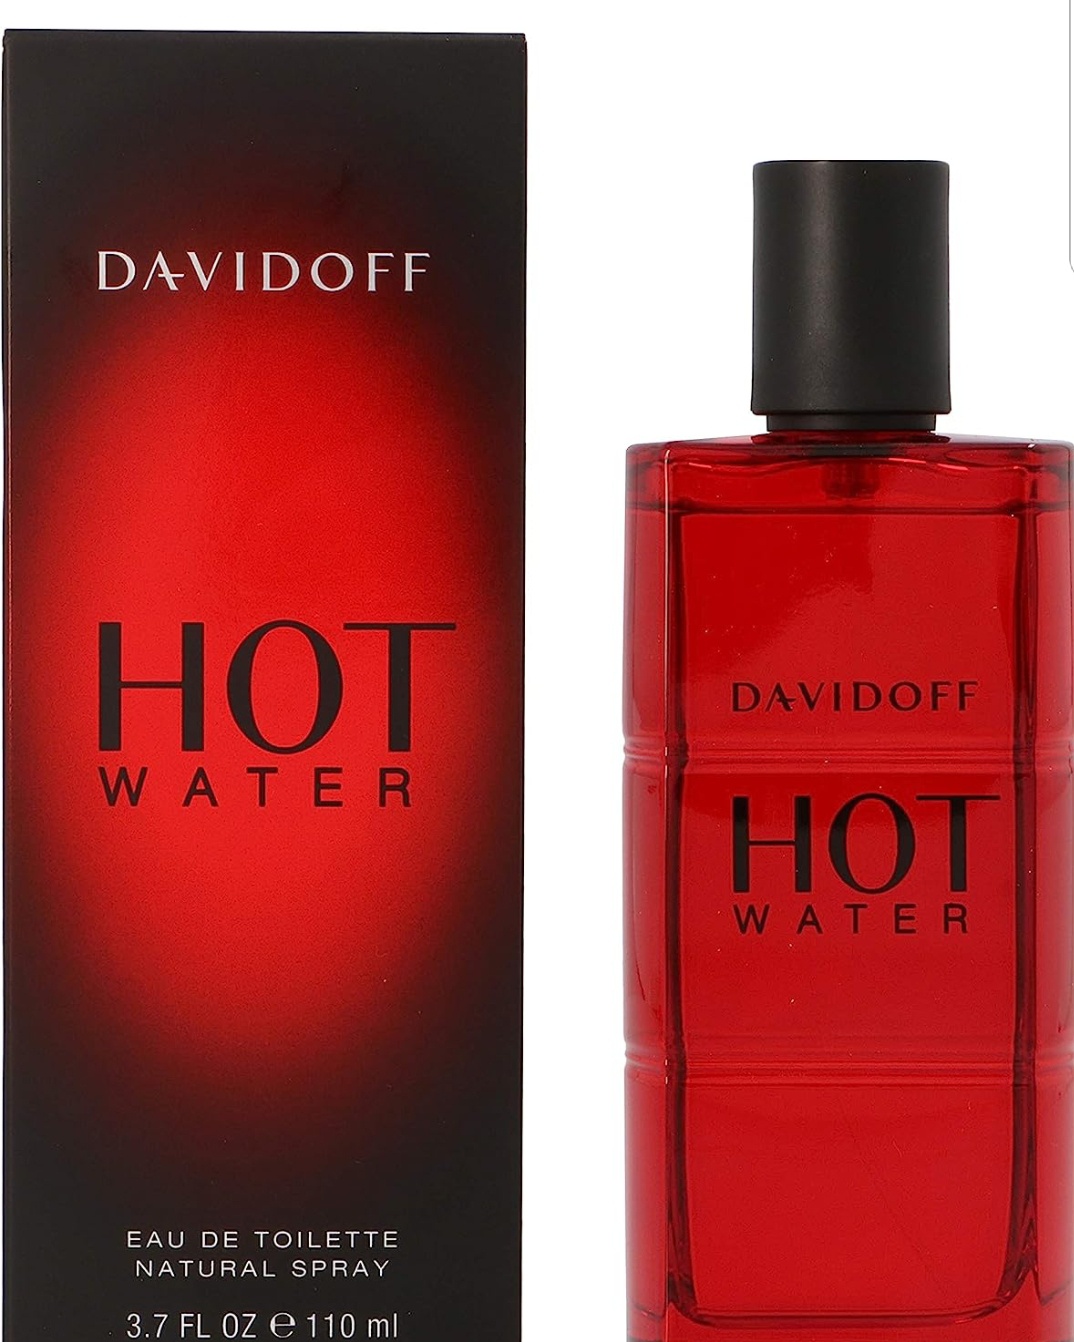 Hot Water by Davidoff for Men